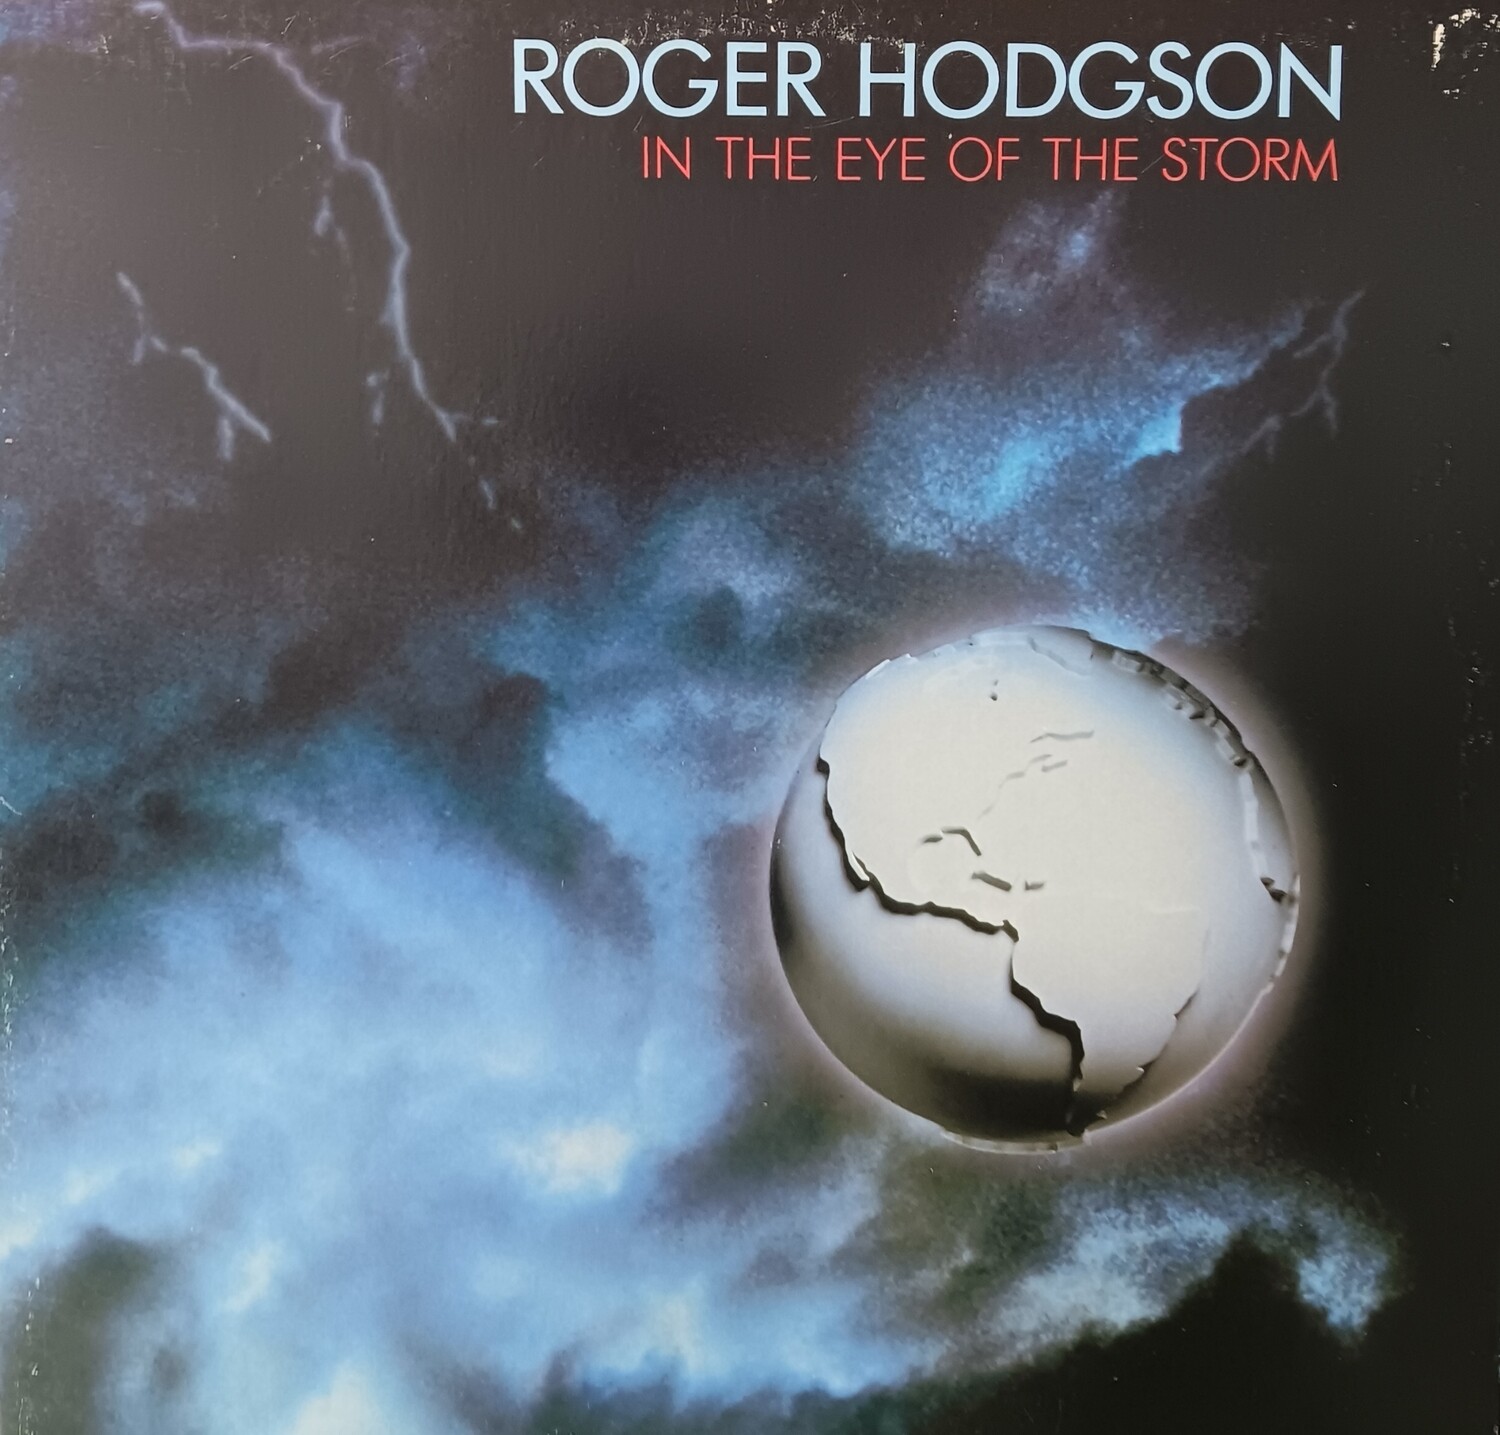 ROGER HODGSON - In the eye of the storm